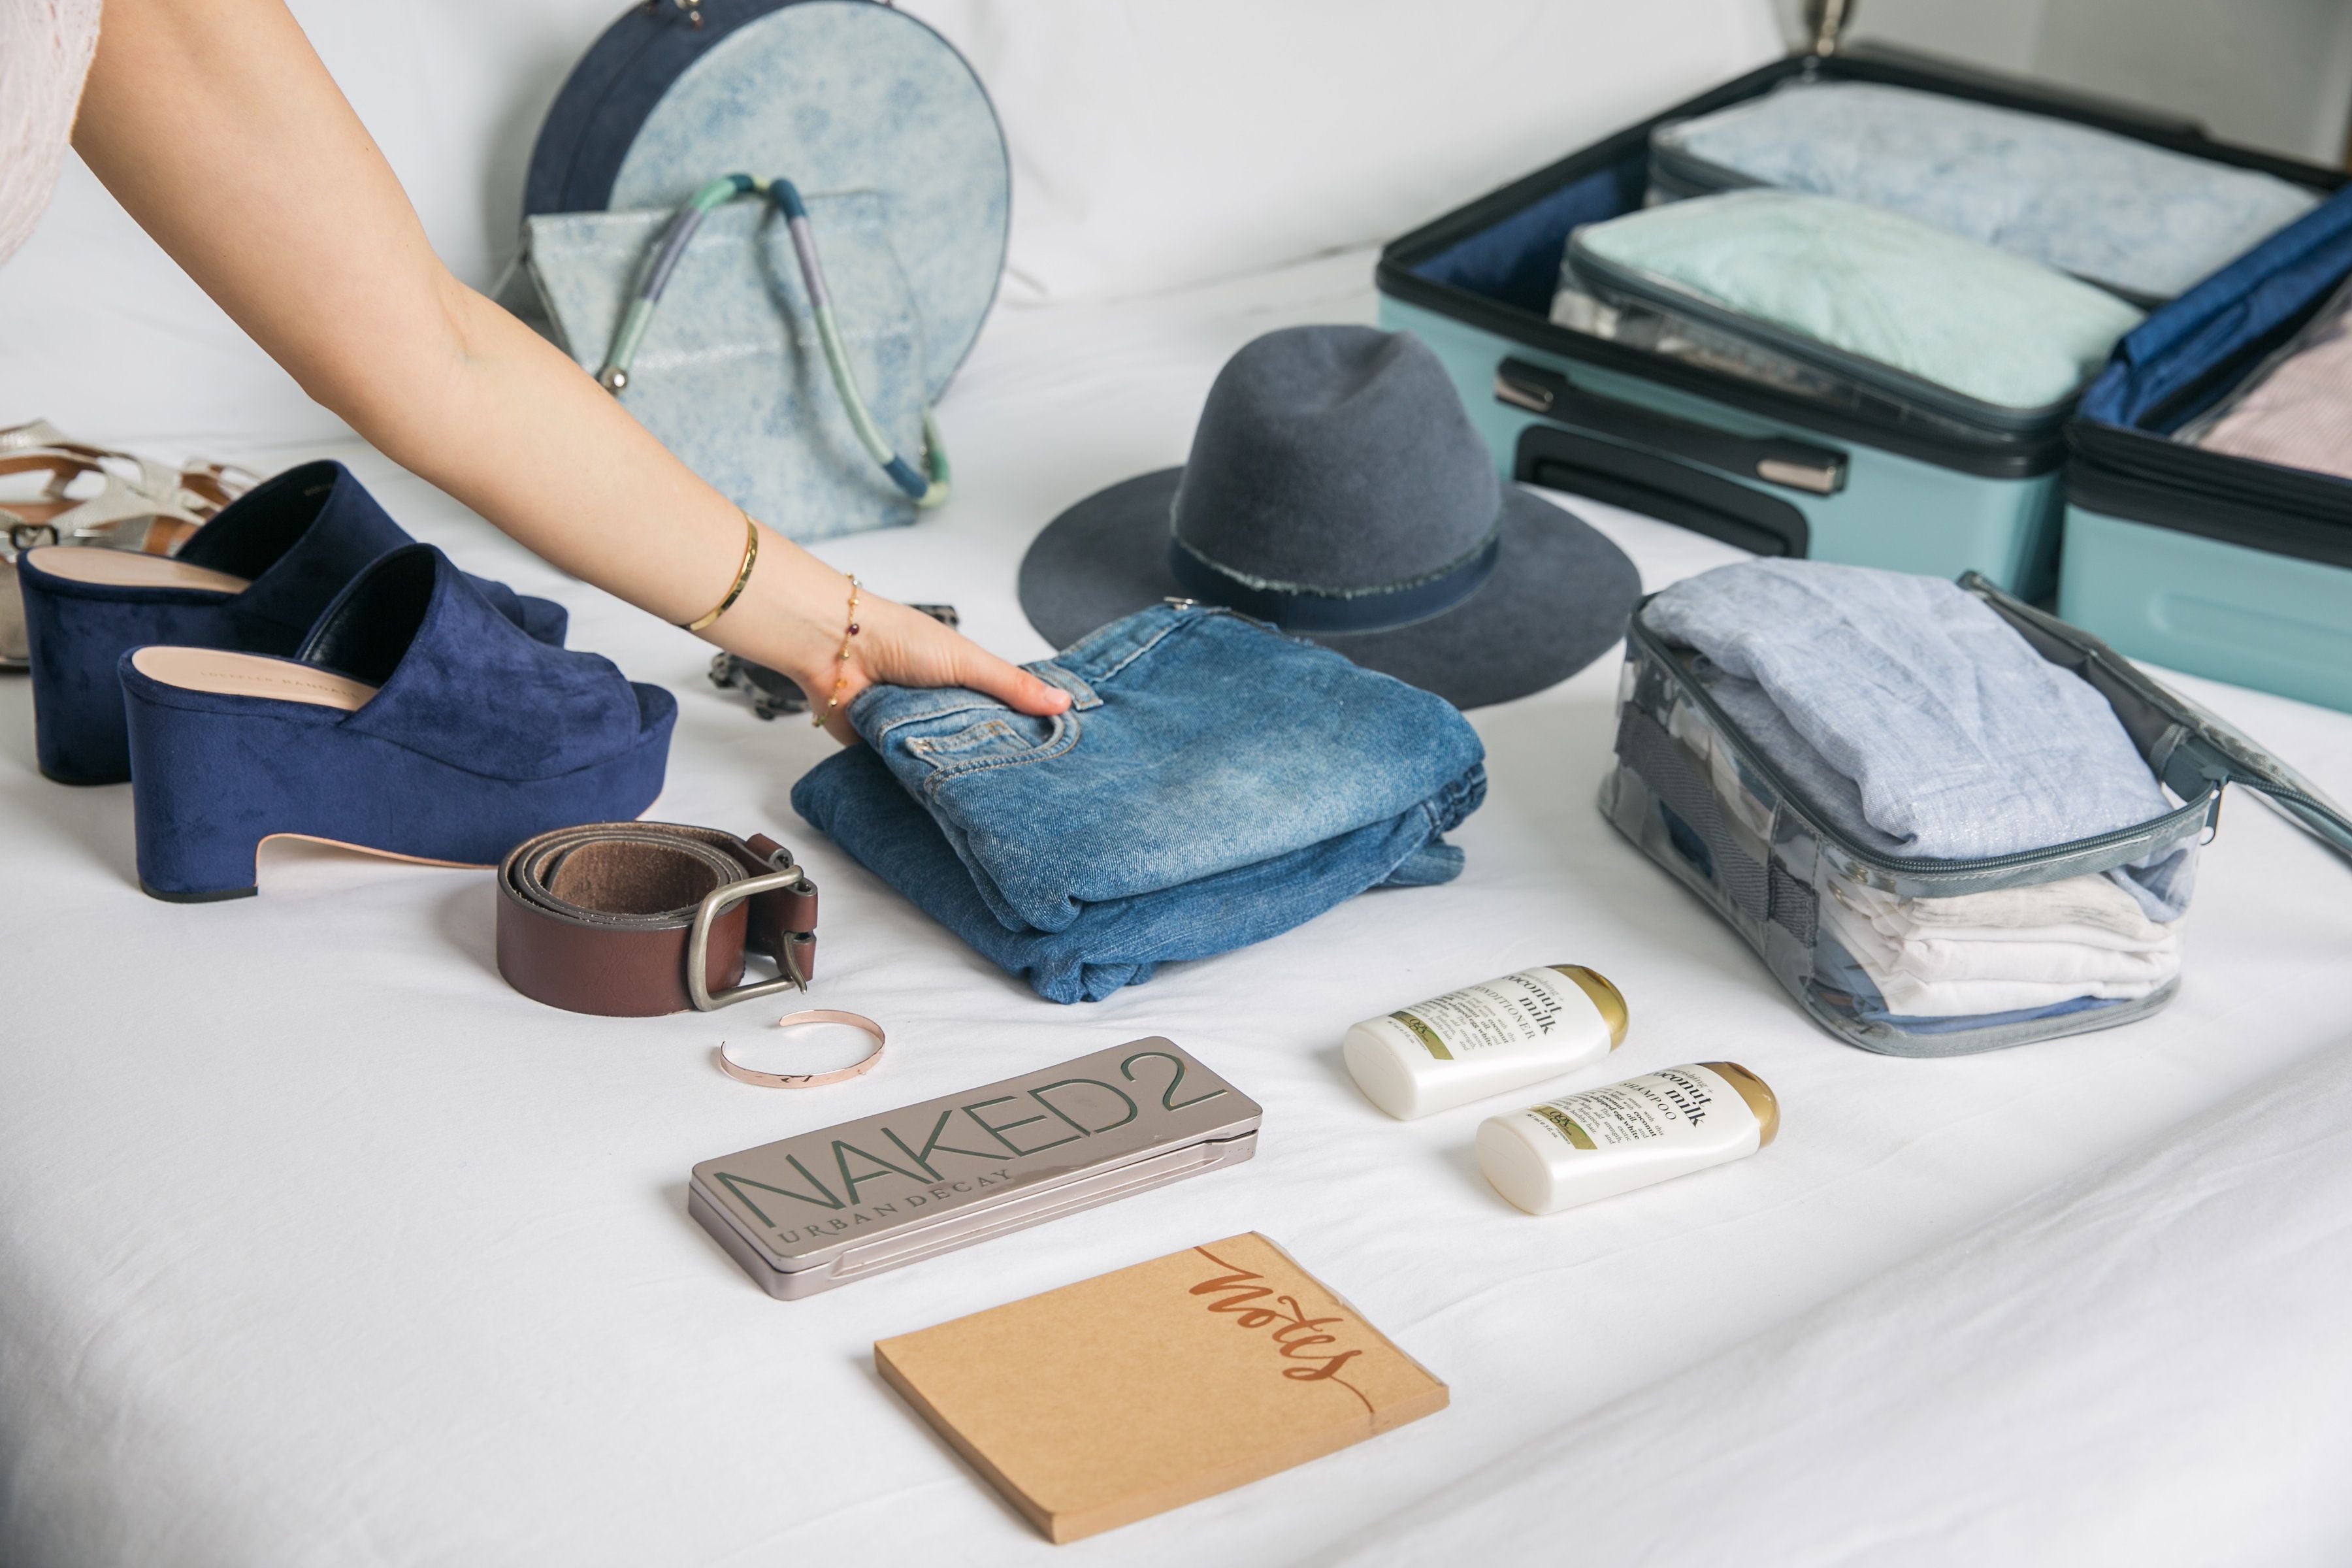 Travel essentials and jeans laid out on the bed with clear packing cubes